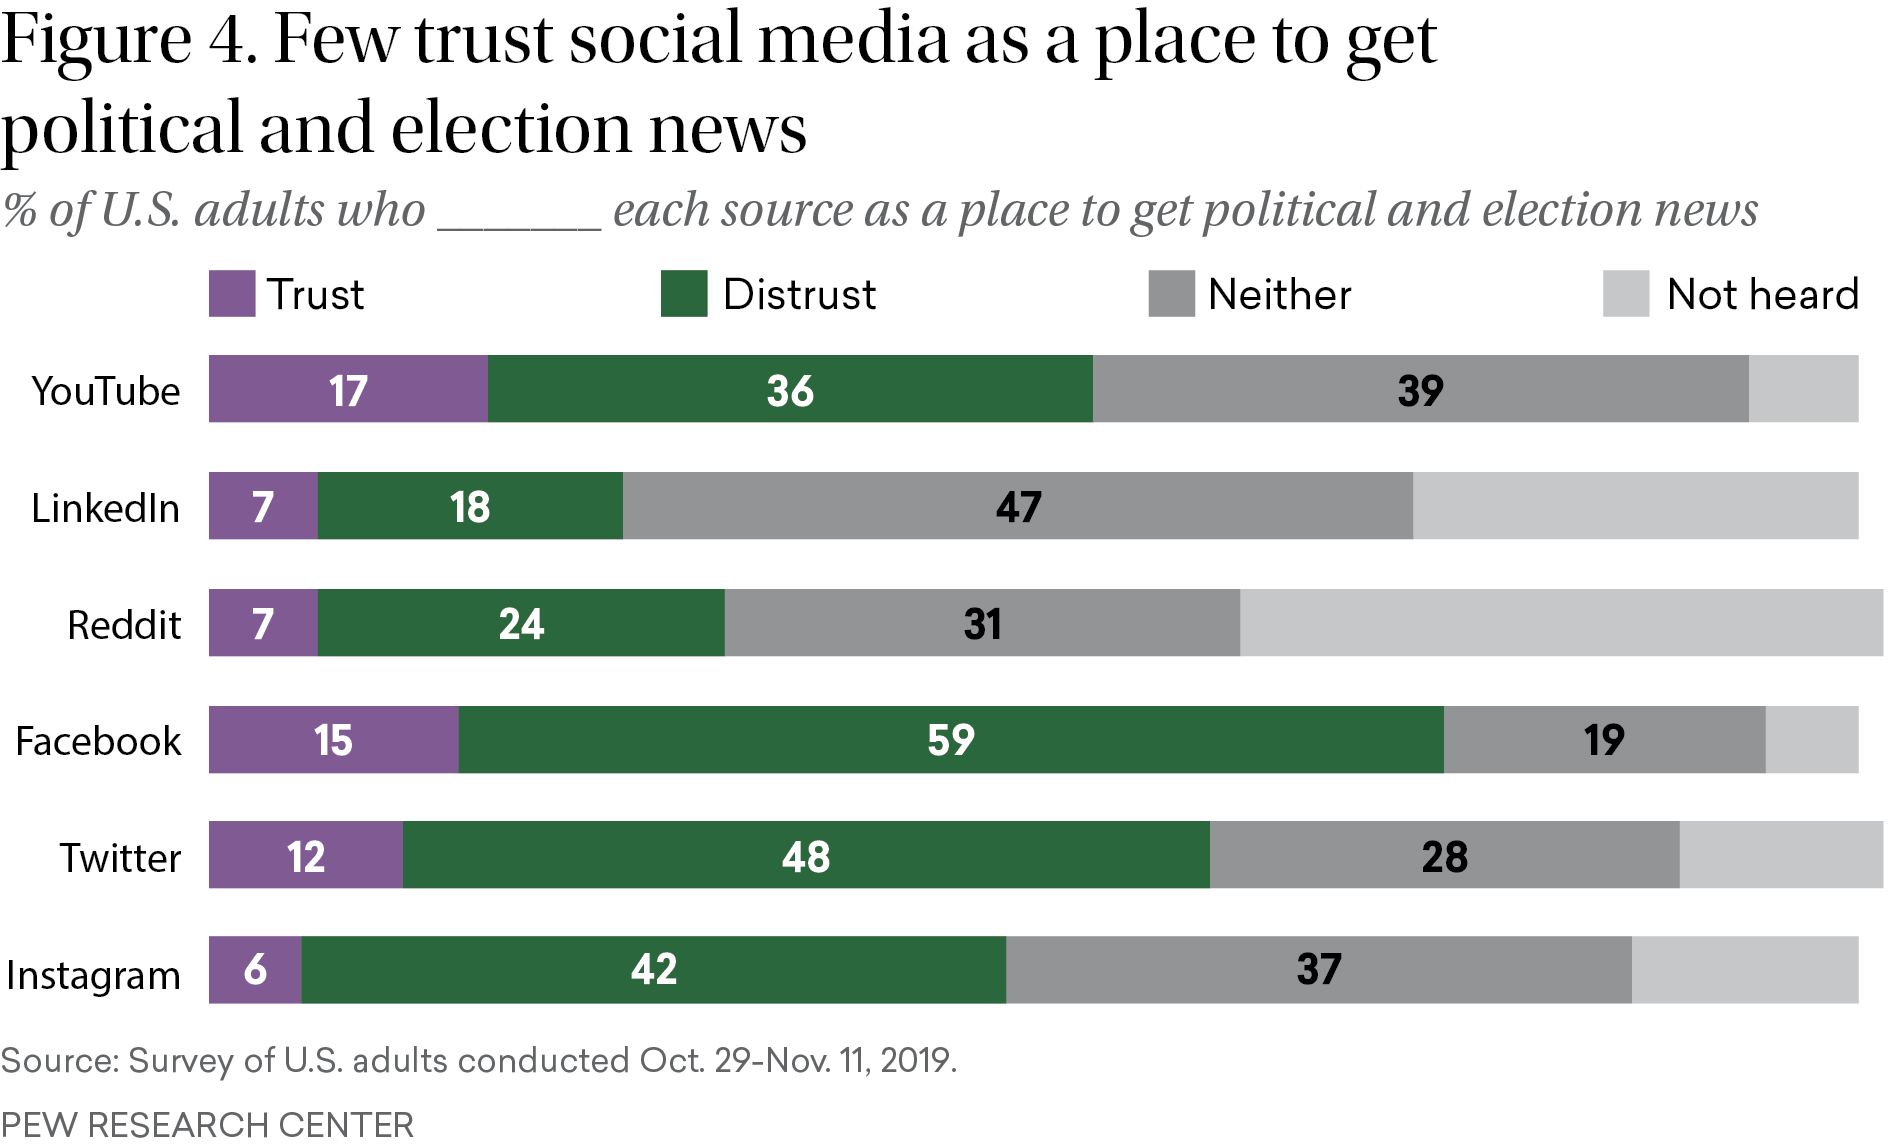 Figure 4: A bar chart shows wide distrust of social media. Rates of adults’ trust in various platforms are low.